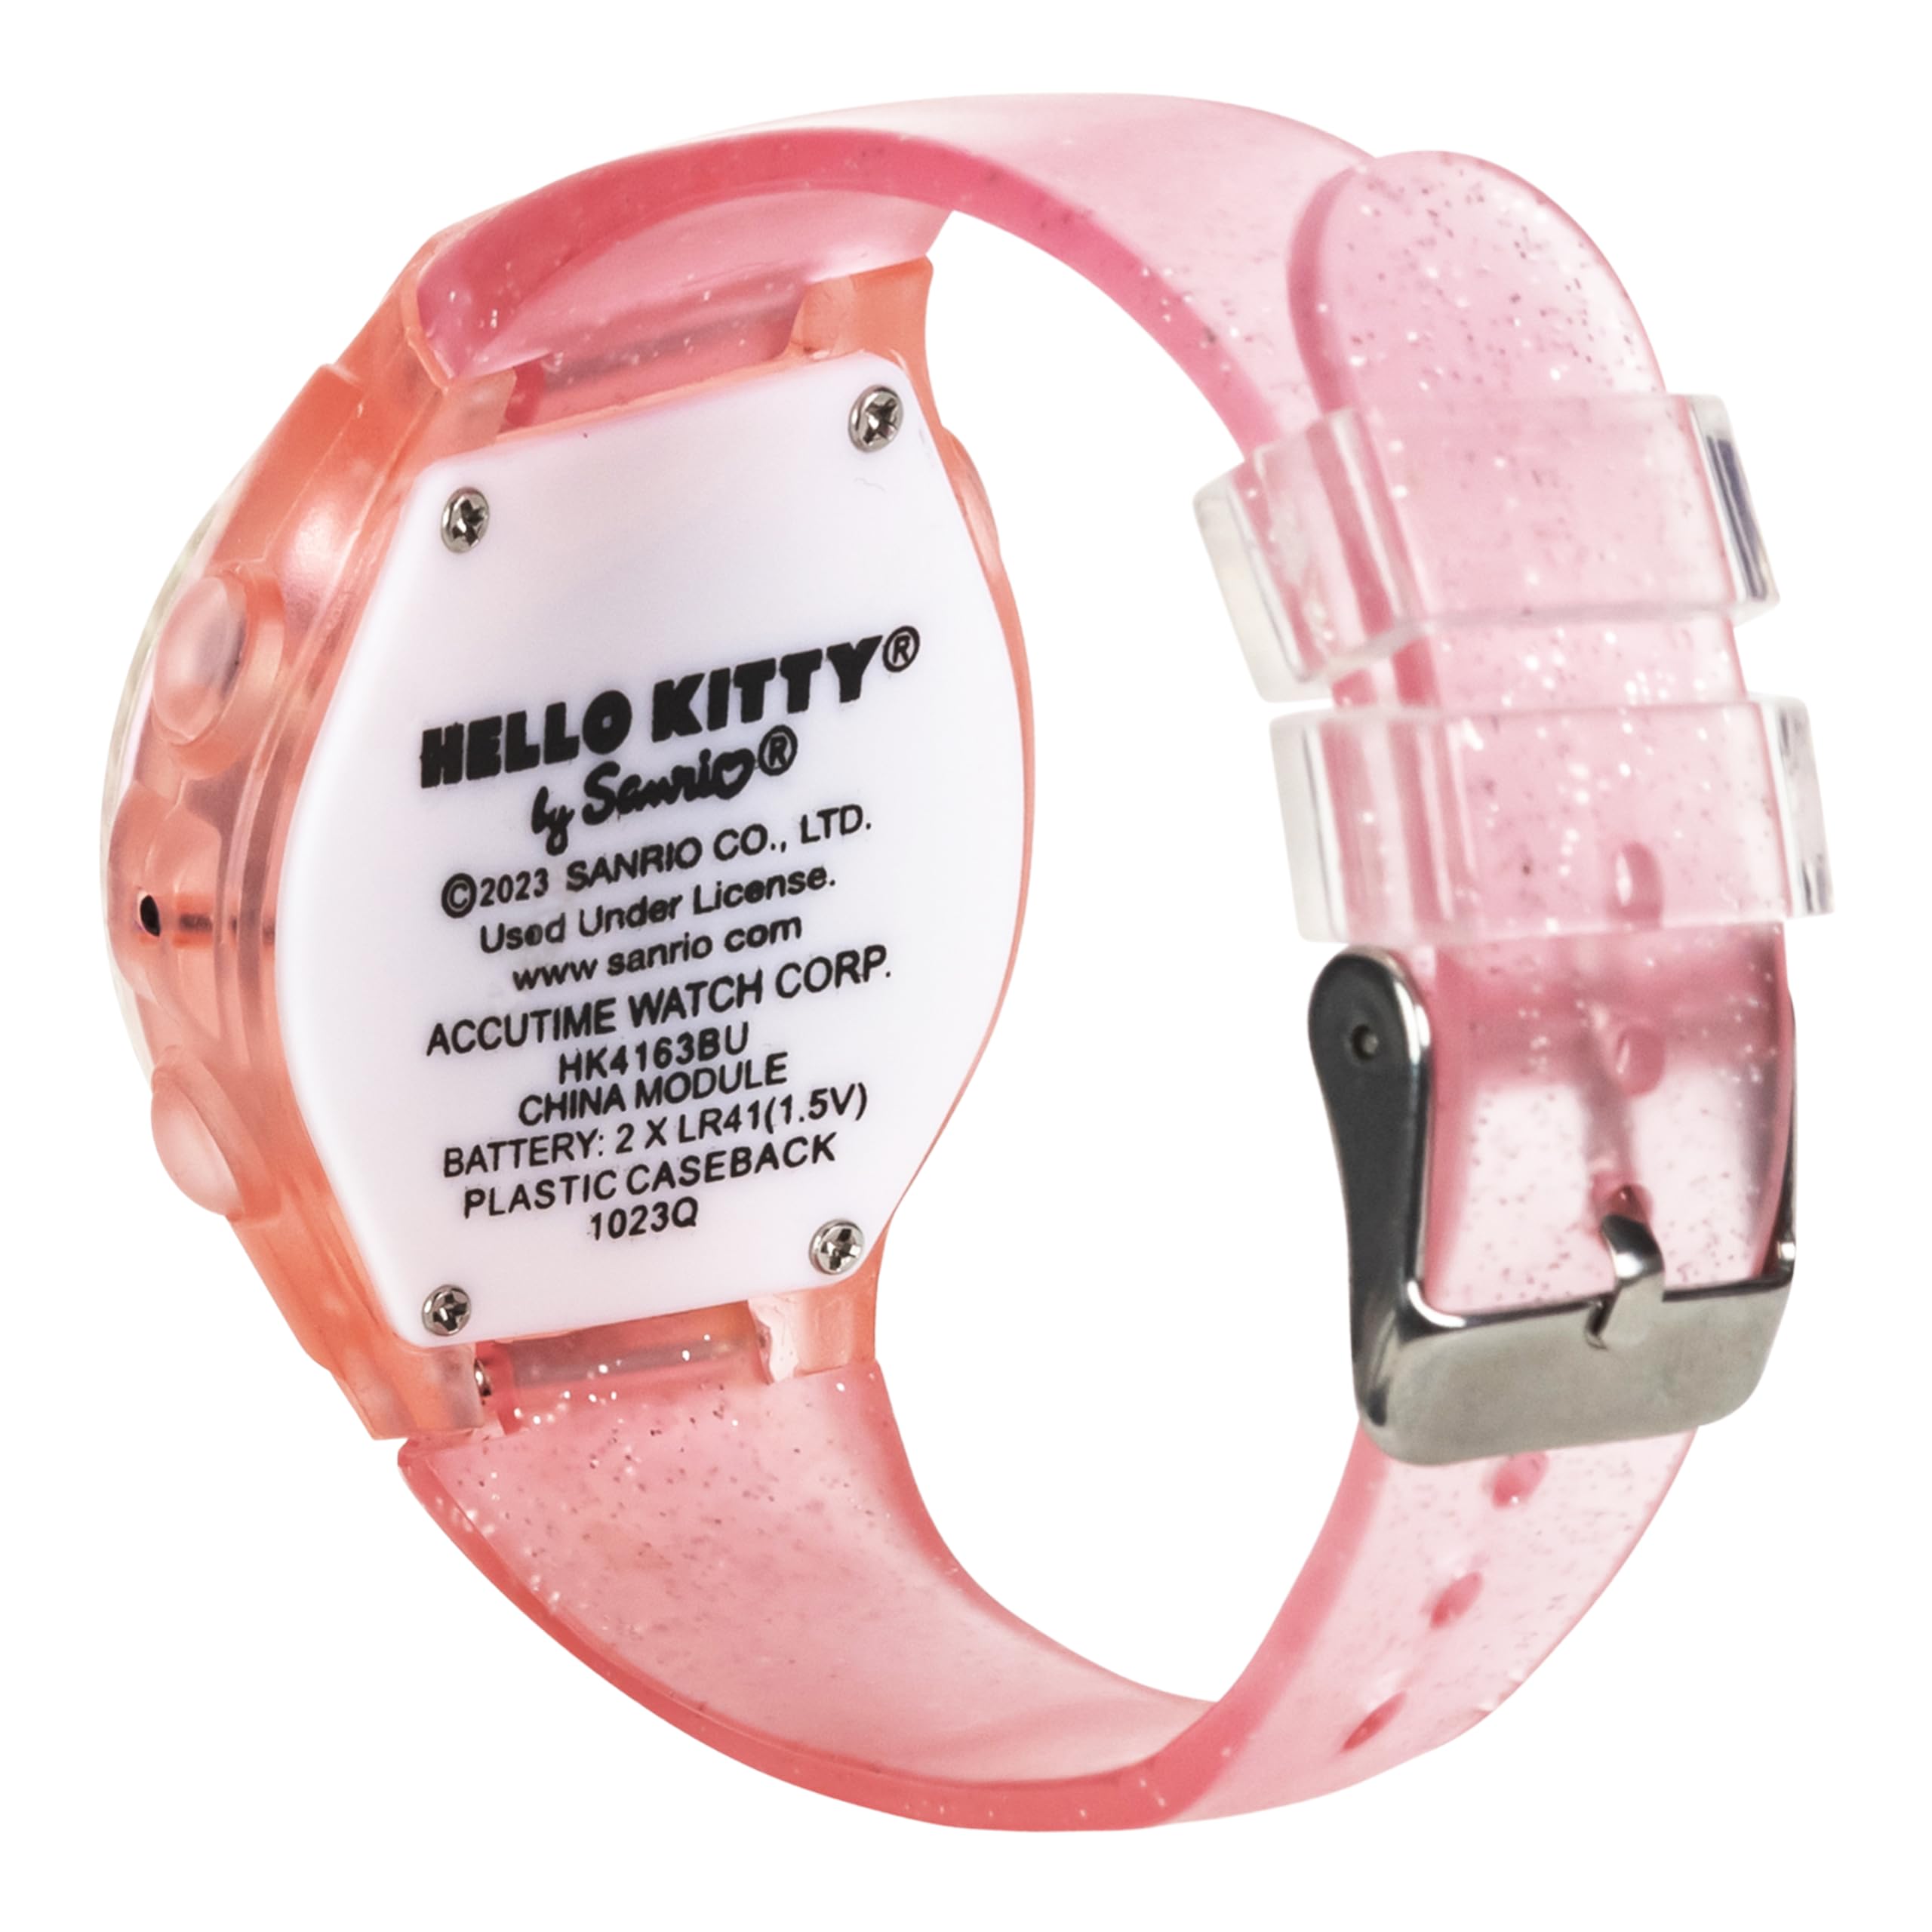 Accutime Hello Kitty Digital LCD Quartz Kids Pink Watch for Girls with Pink Sparkle Band Strap (Model: HK4163AZ)